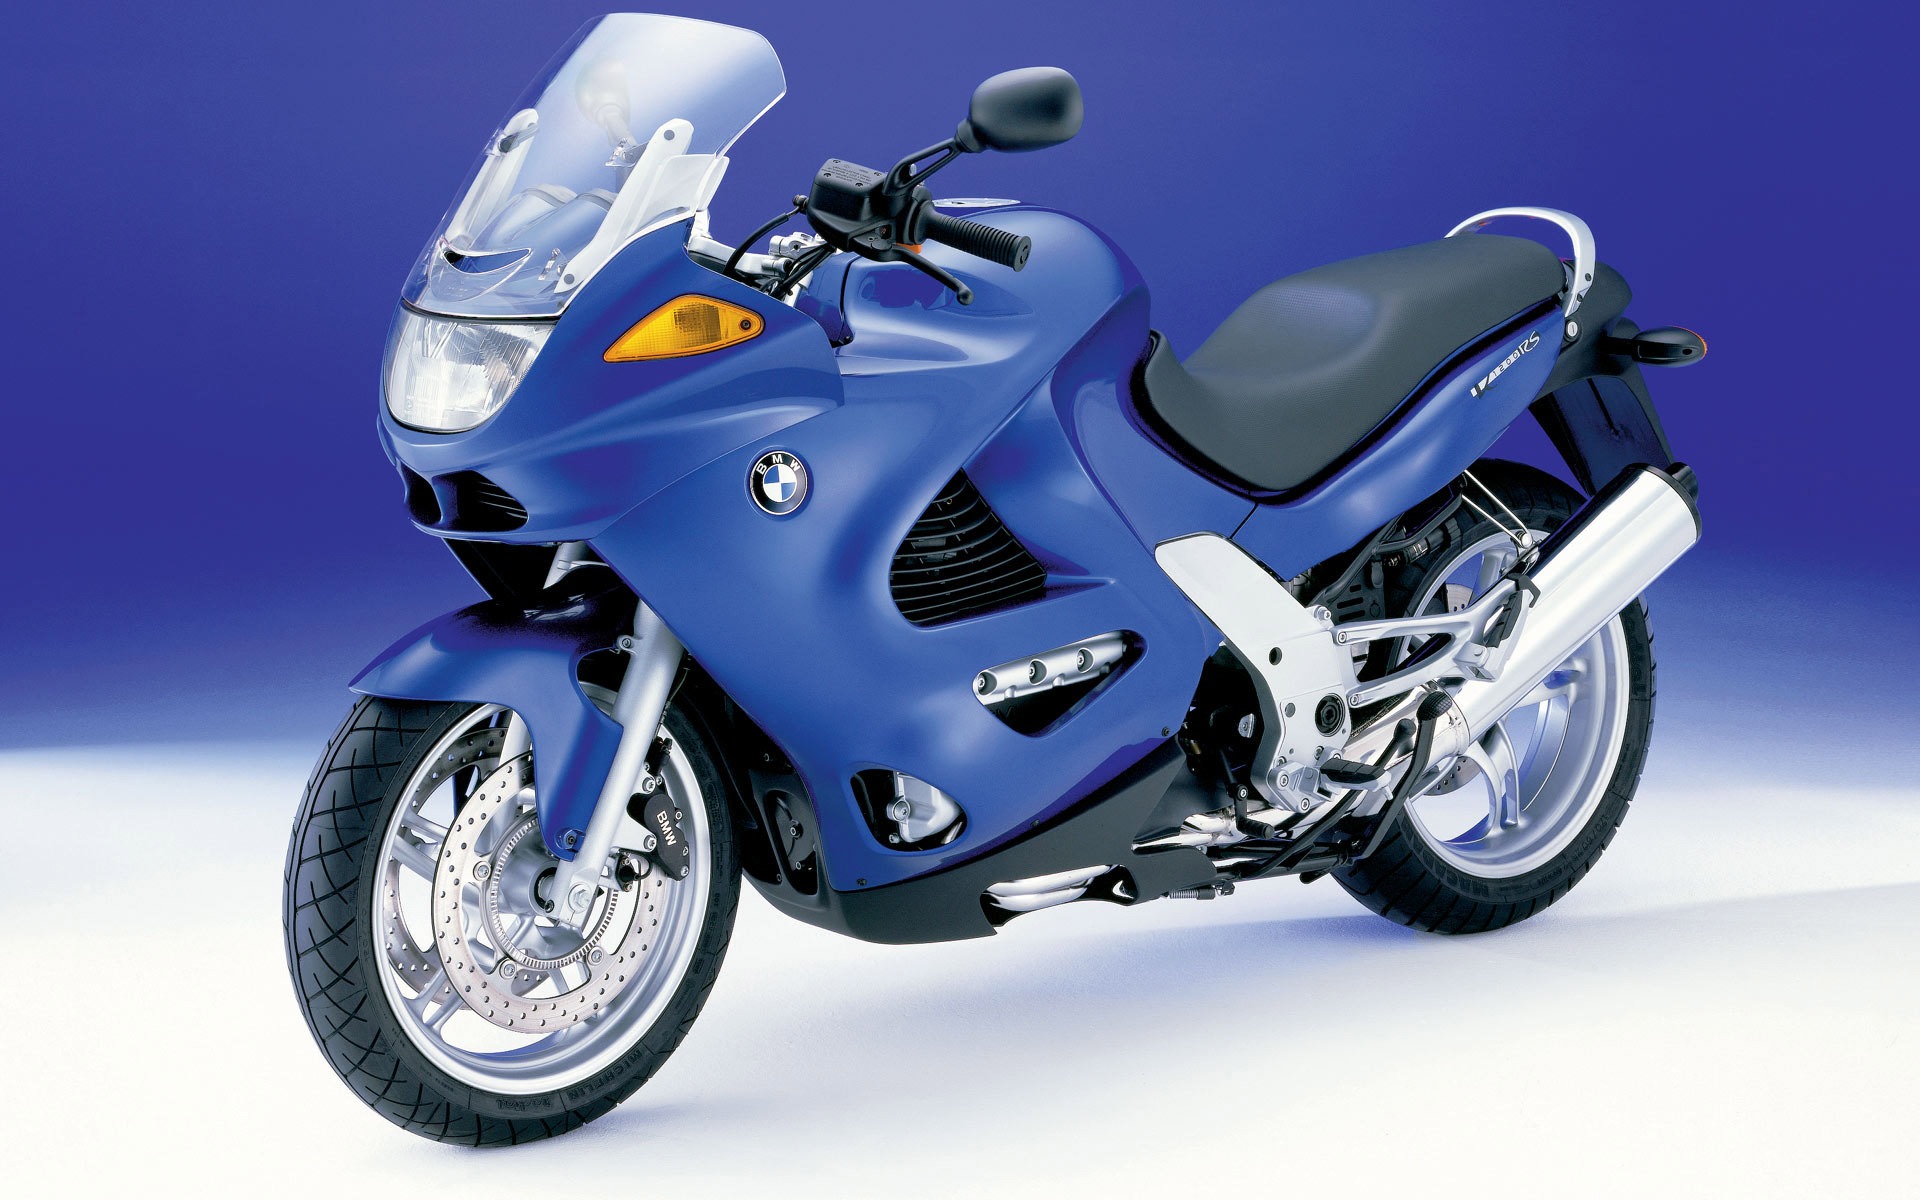 BMW motorcycle wallpapers (1) #2 - 1920x1200